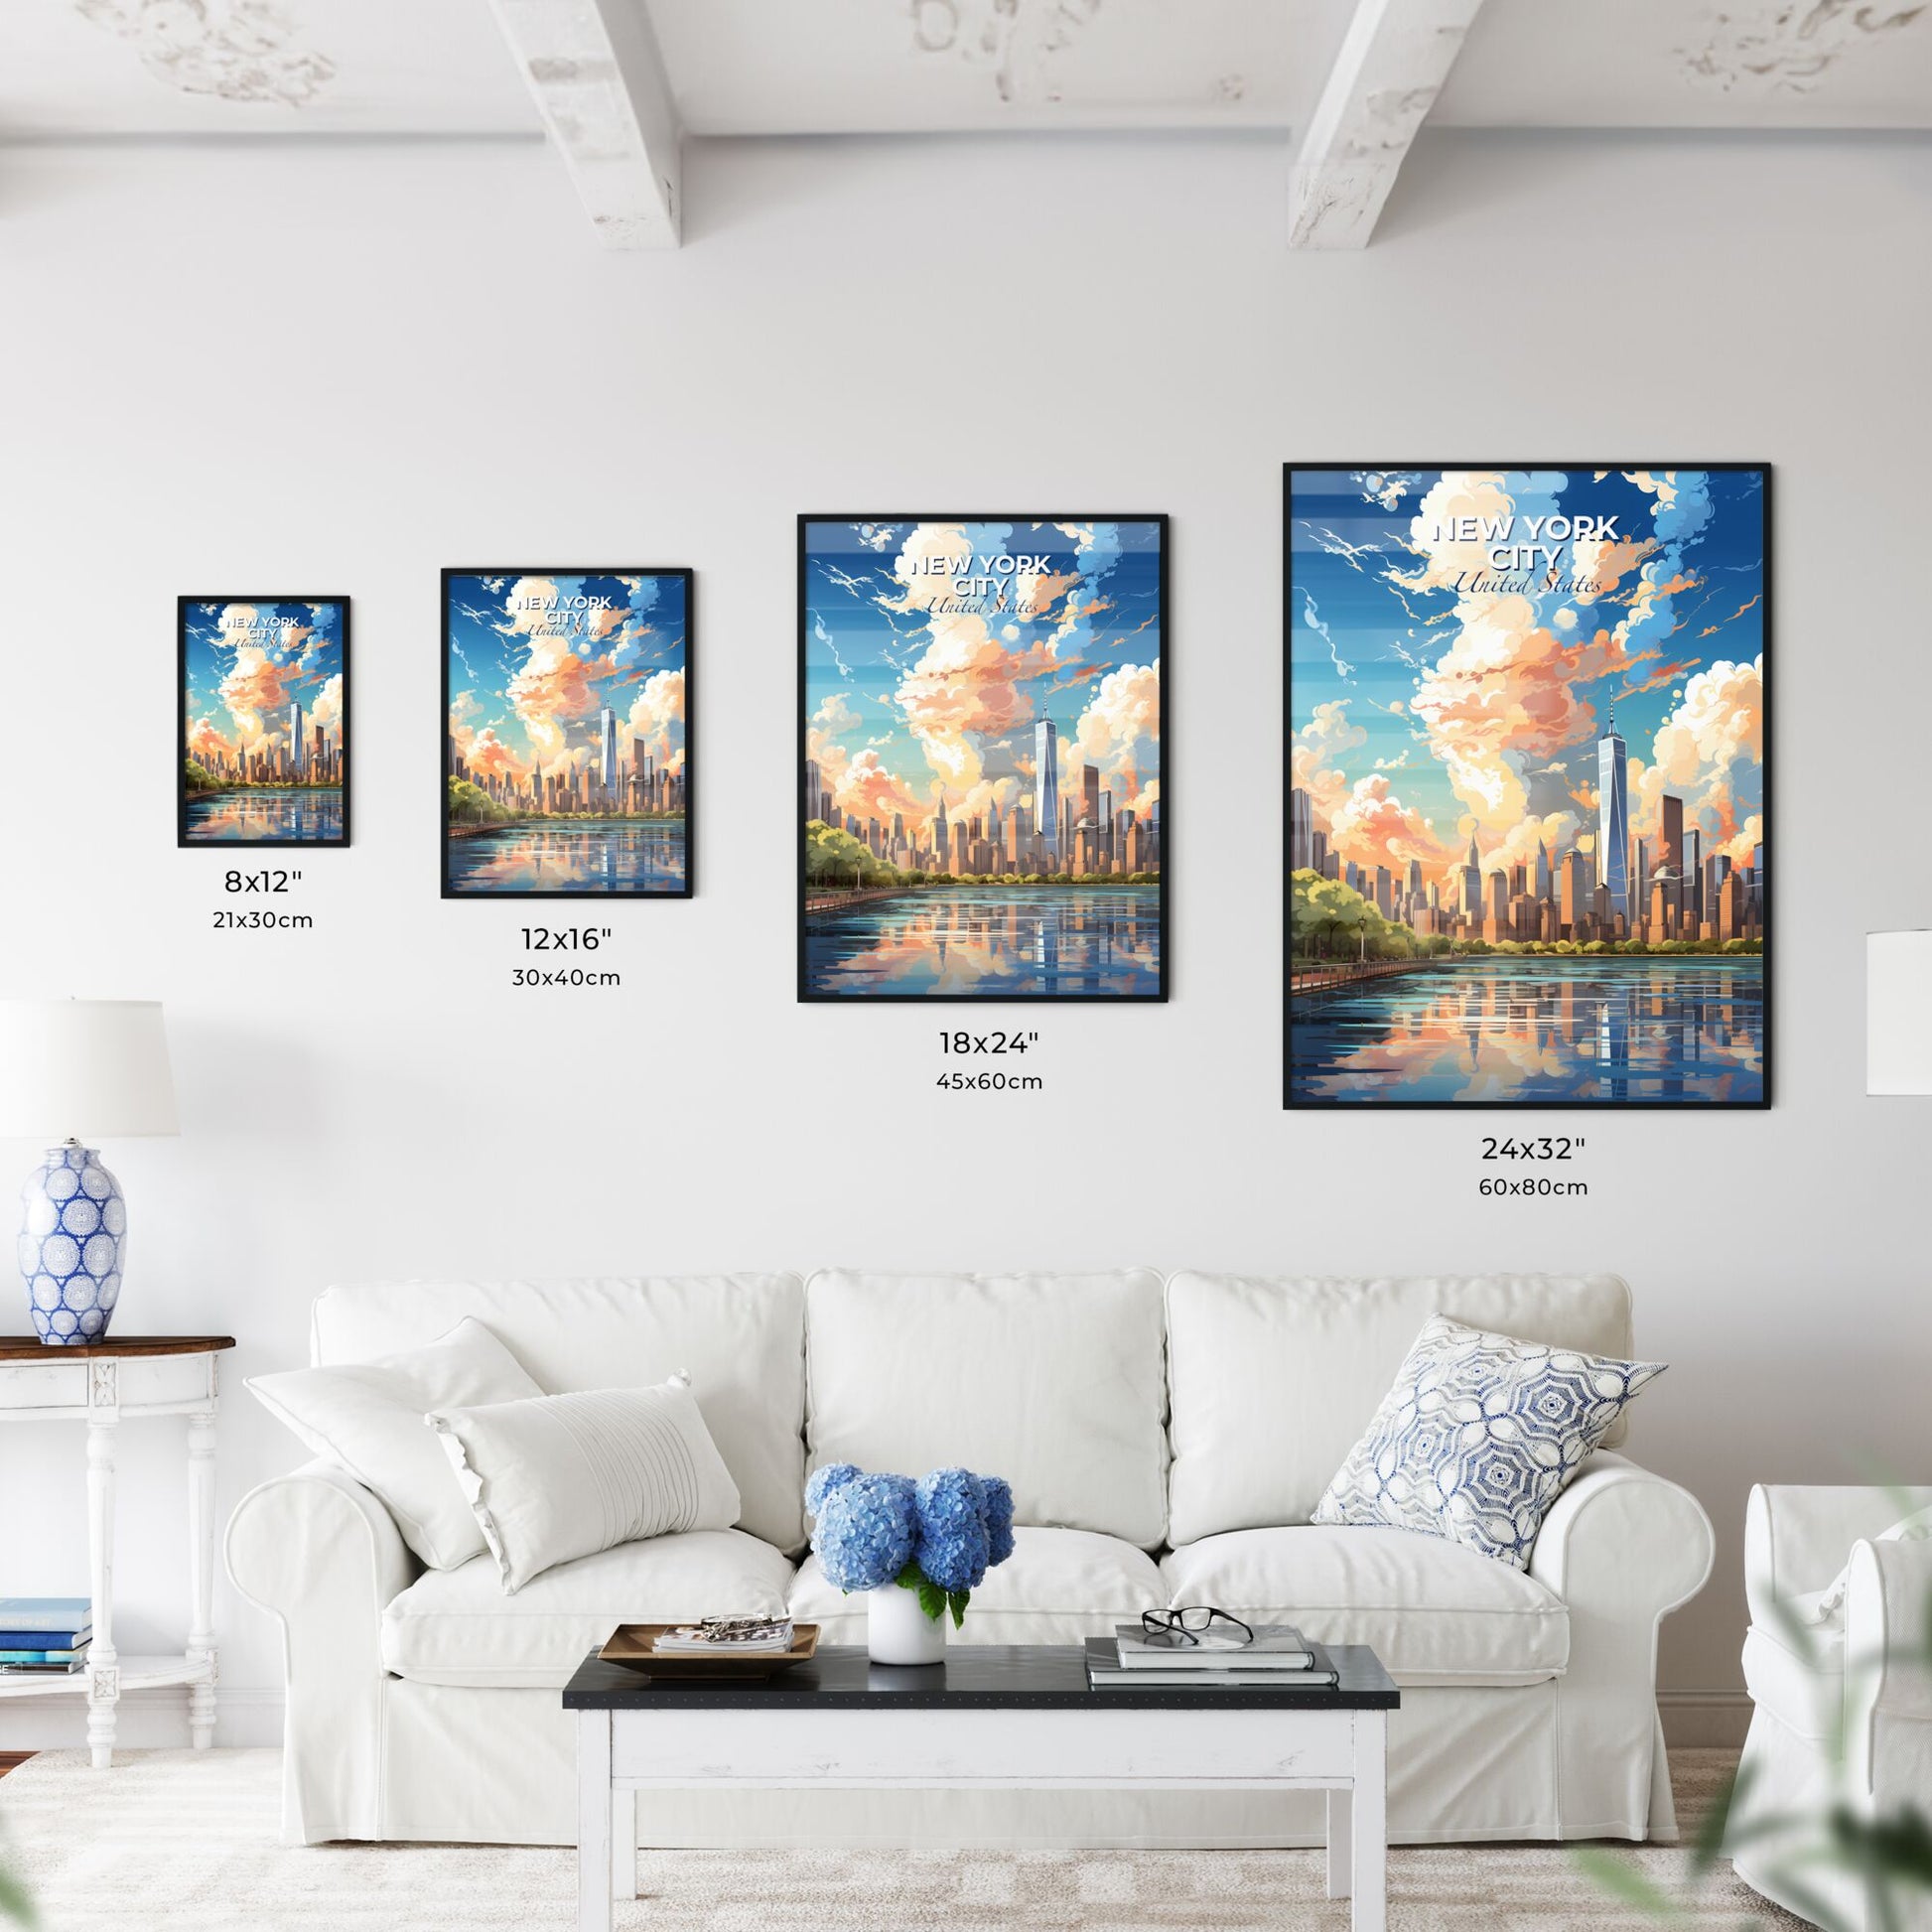 New York City Skyline - A City Skyline With Trees And A Body Of Water - Customizable Travel Gift Default Title